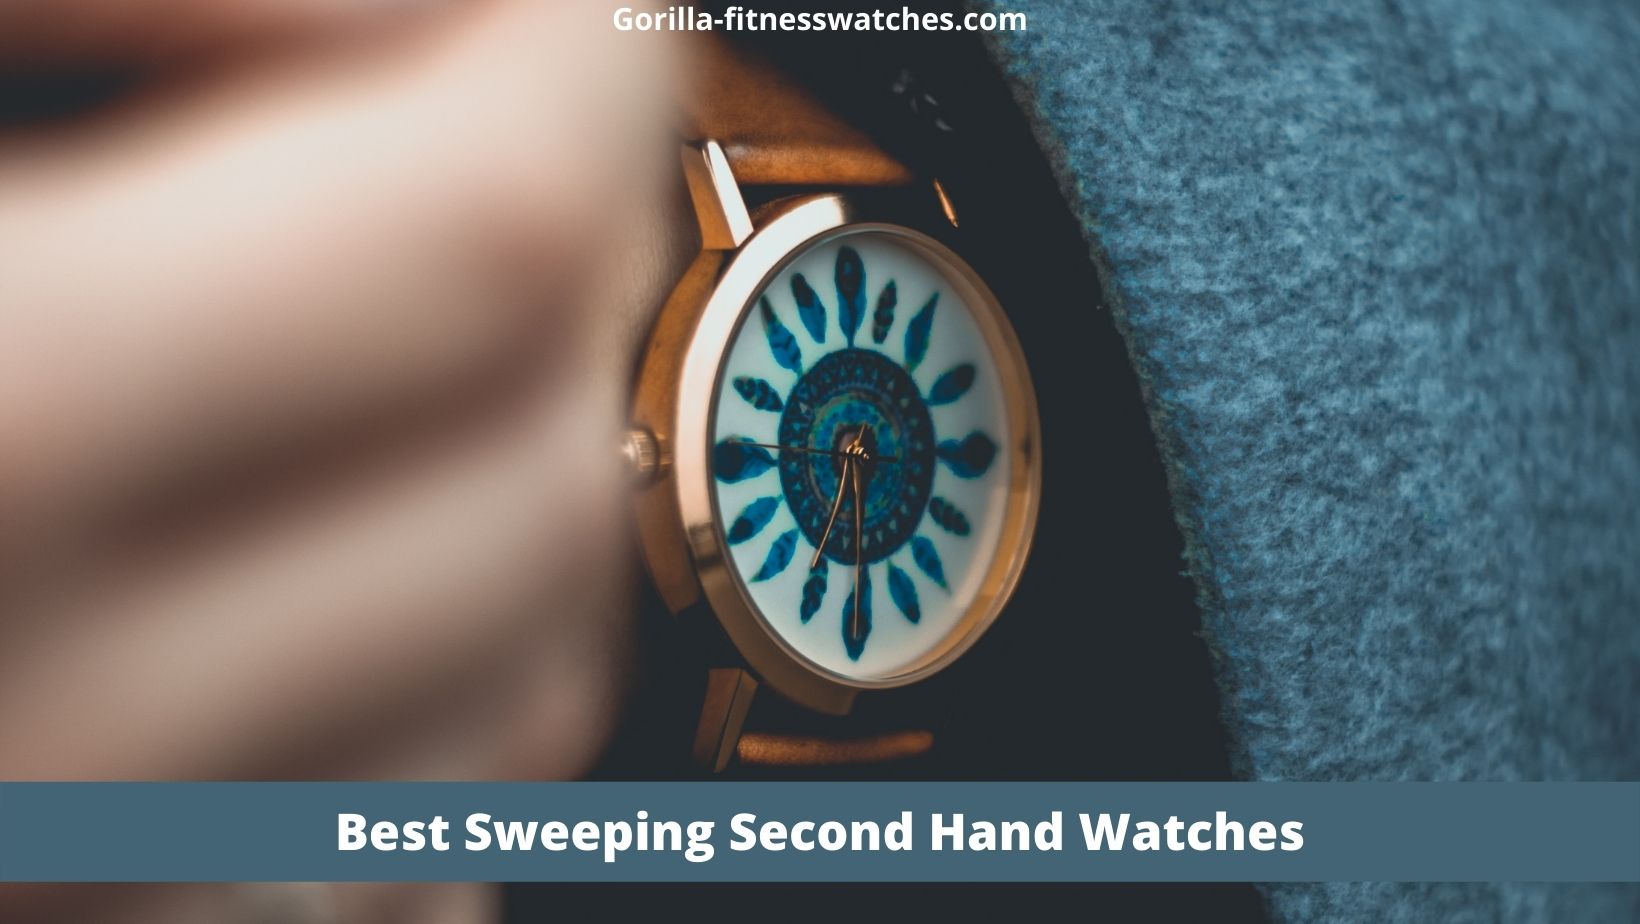 Best Sweeping Second Hand Watches